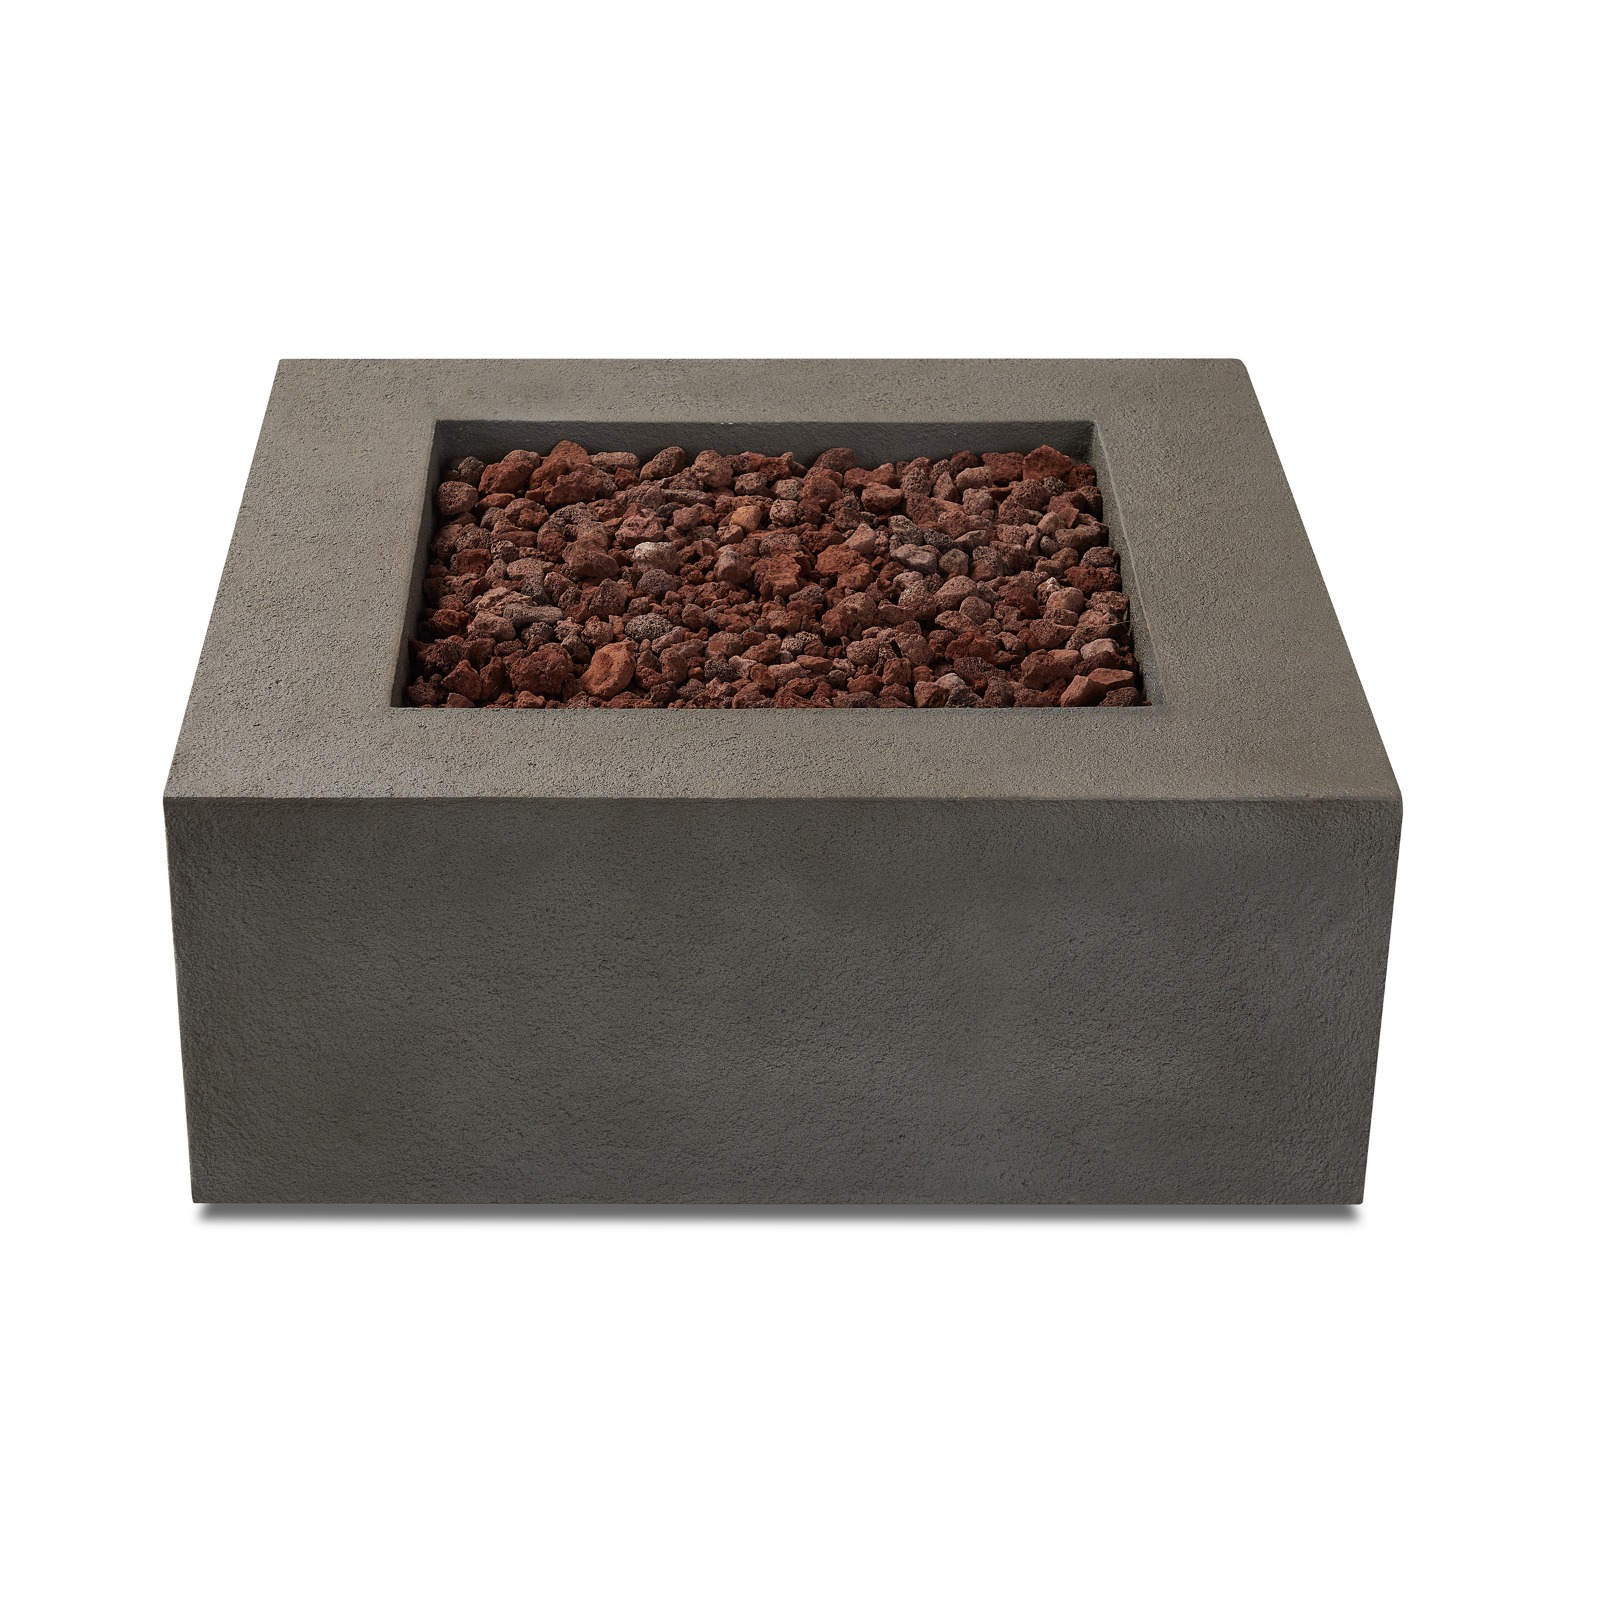 Baltic Square Natural Gas or Propane Fire Pit Outdoor Fireplace Fire Table for Backyard or Patio